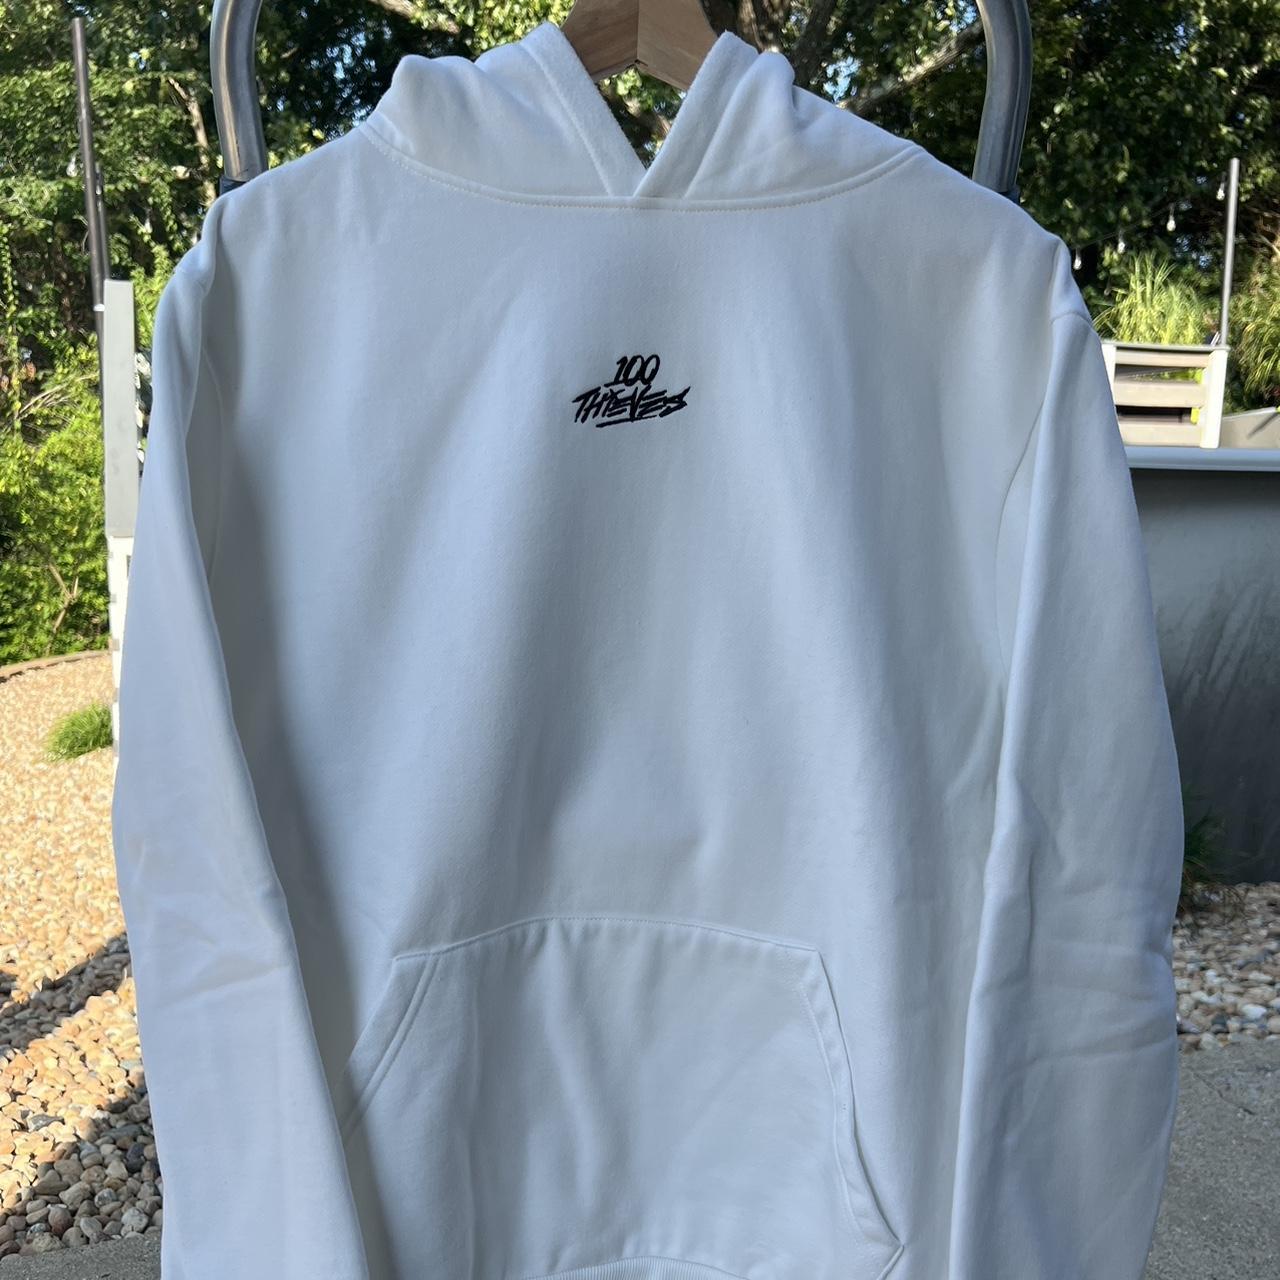 100 Thieves Hoodie in white, L tag Only sign of... - Depop